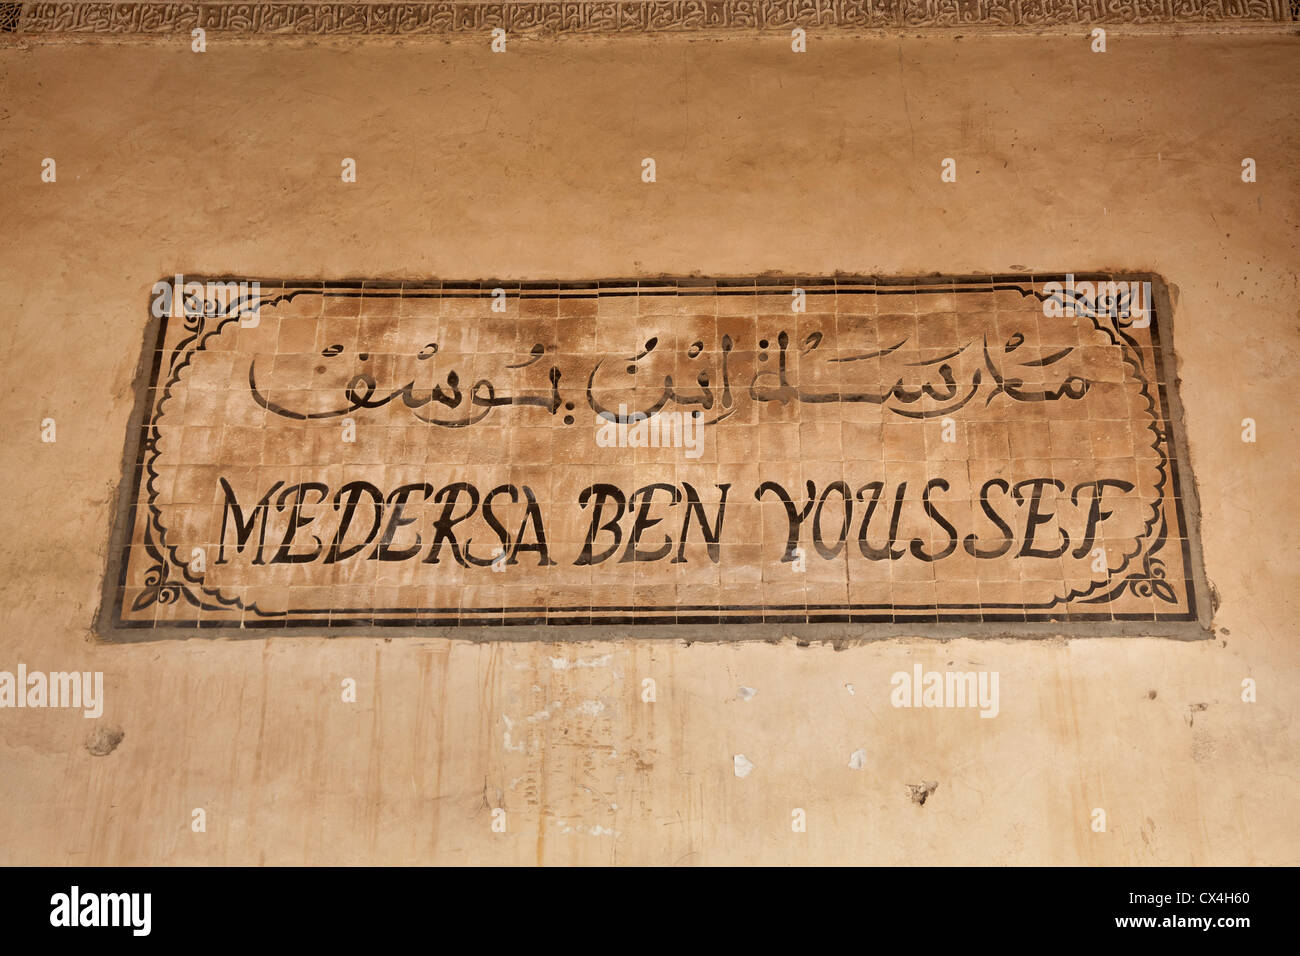 Ancient sign of the Medersa Ben Youssef in Marrakech, Morocco, April 1,2012 Stock Photo